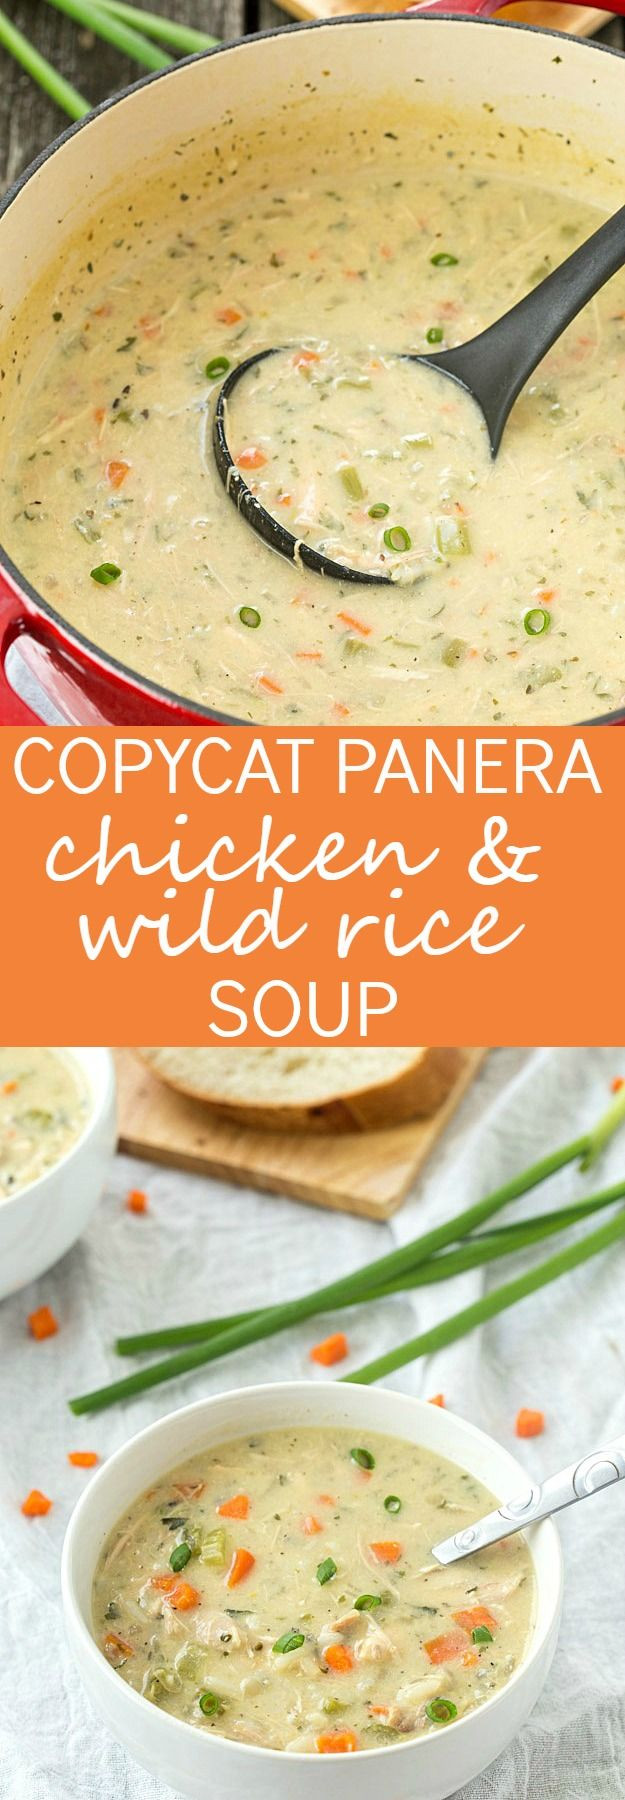 Panera Chicken And Wild Rice Soup
 Monchoso Copycat Panera Chicken and Wild Rice Soup